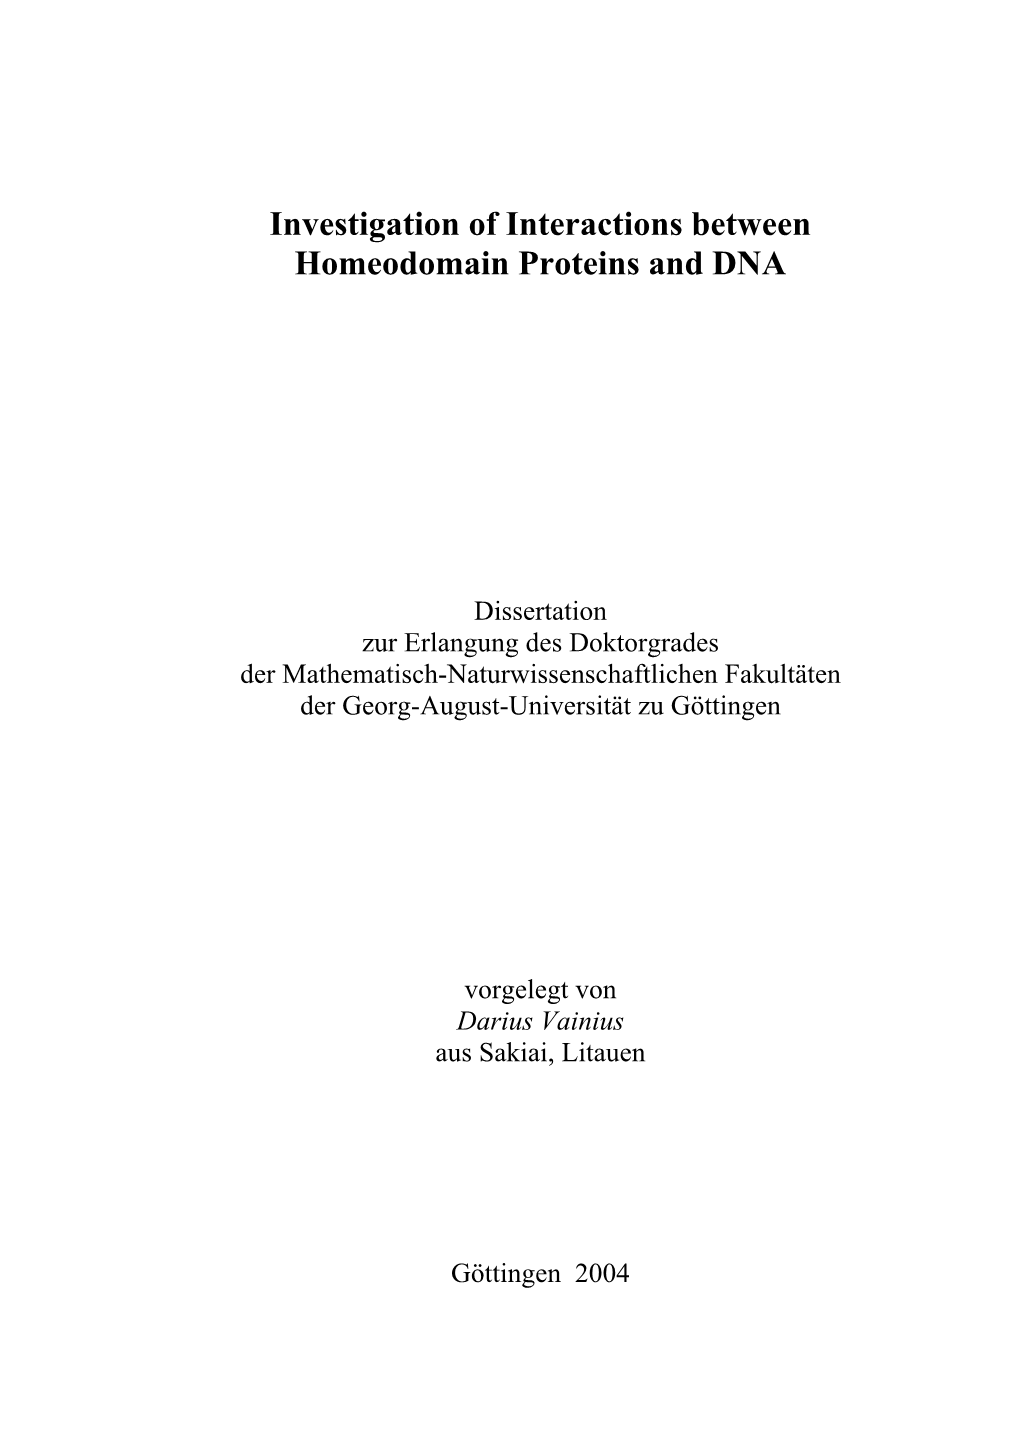 Investigation of Interactions Between Homeodomain Proteins and DNA